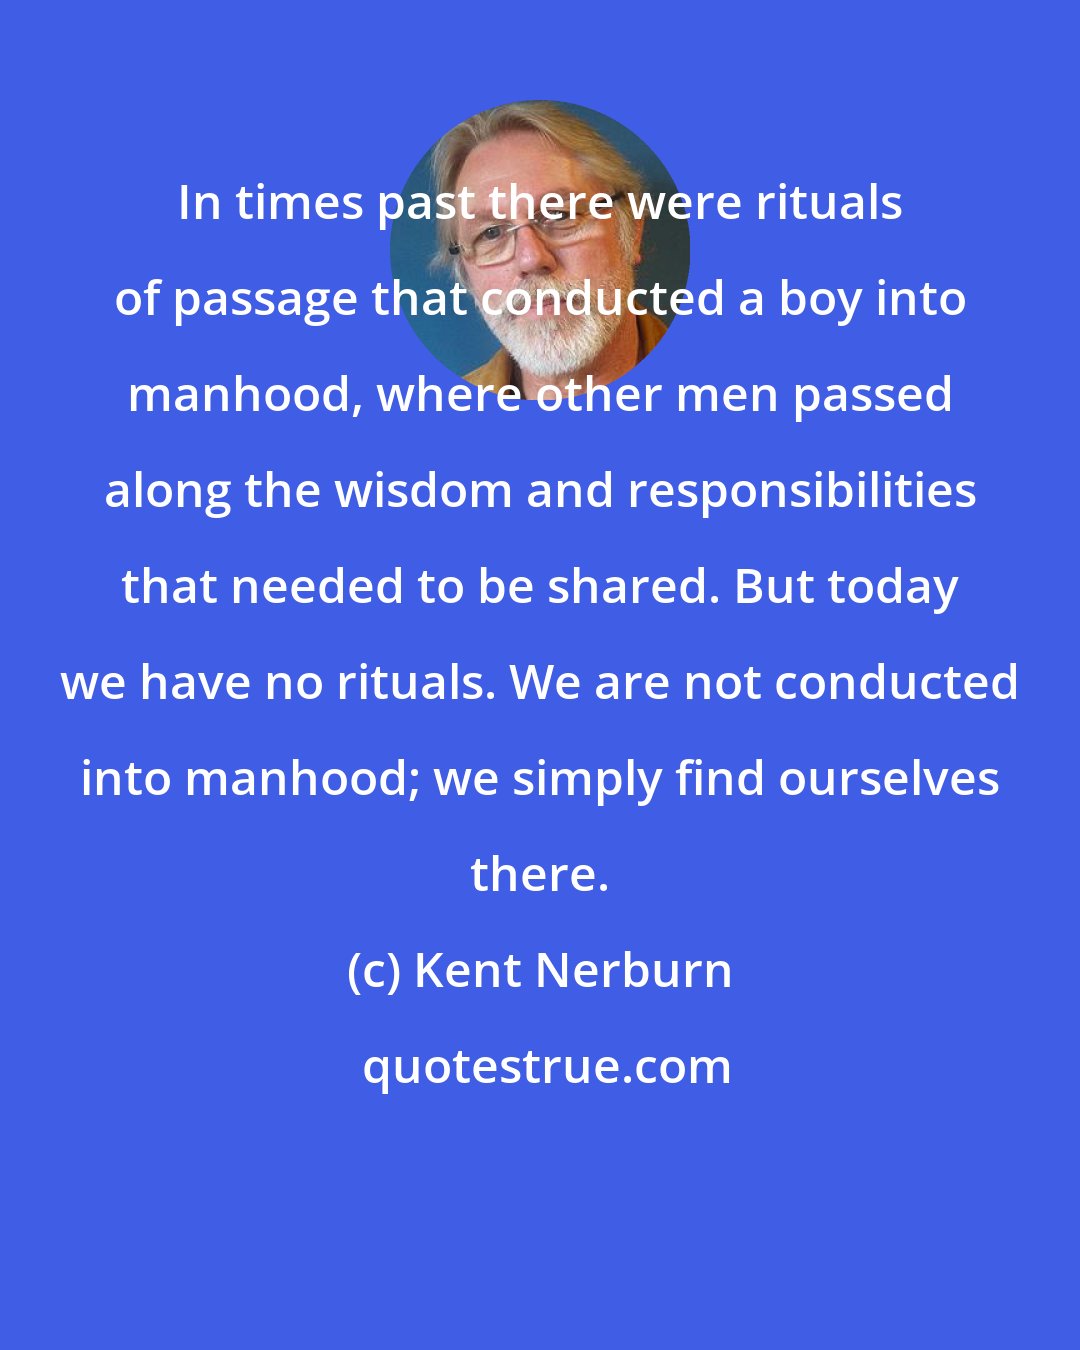 Kent Nerburn: In times past there were rituals of passage that conducted a boy into manhood, where other men passed along the wisdom and responsibilities that needed to be shared. But today we have no rituals. We are not conducted into manhood; we simply find ourselves there.